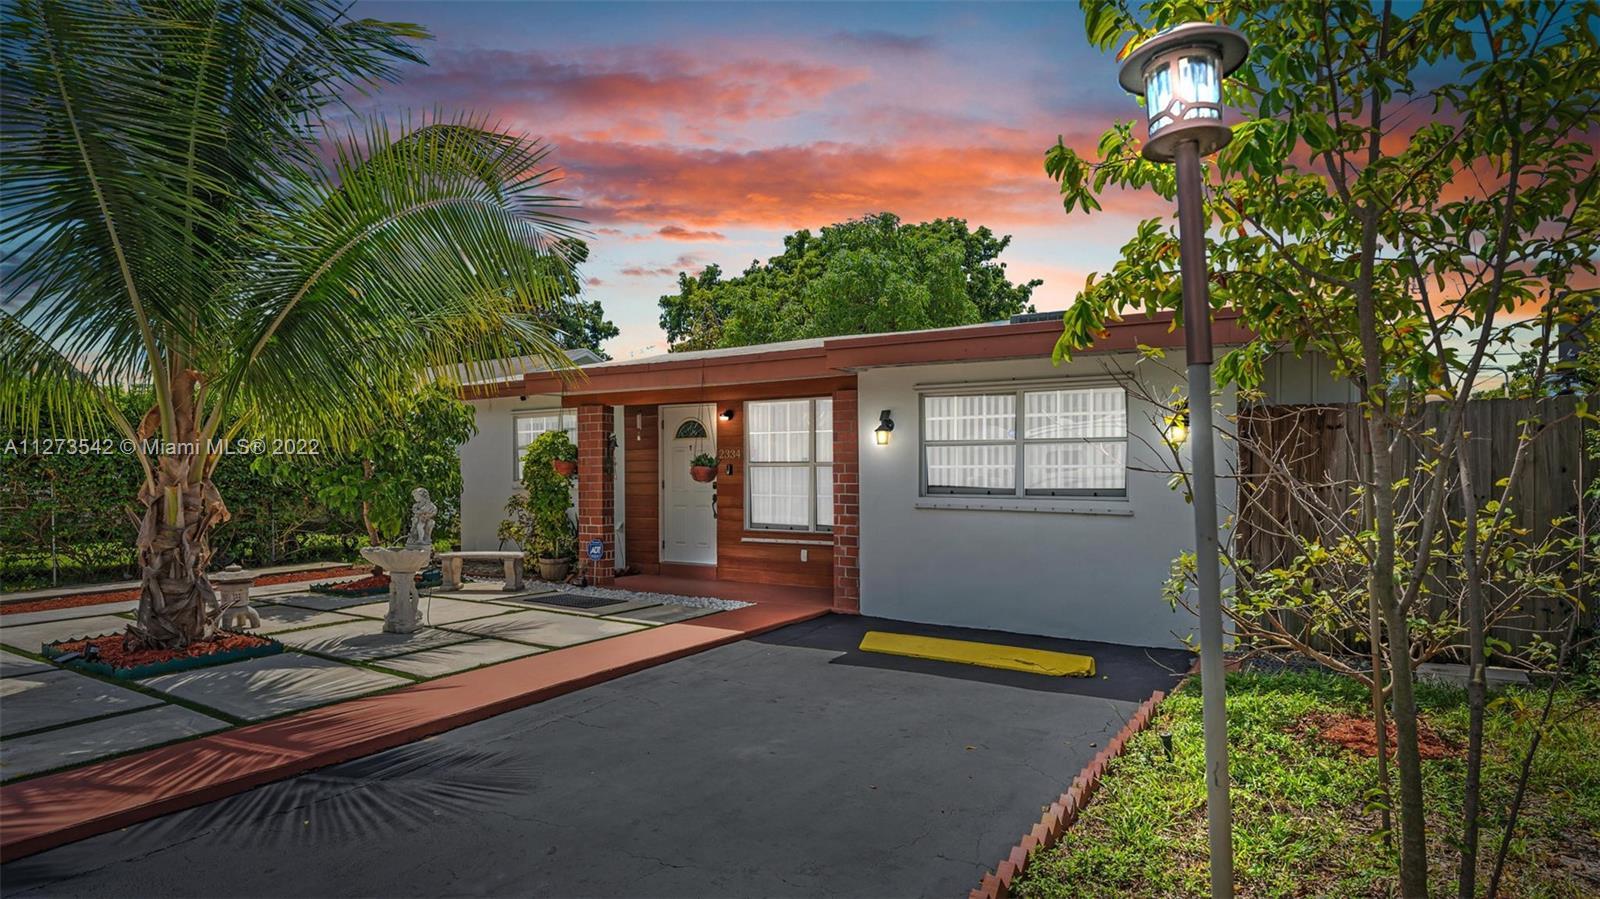 Remarkable home for sale in Hollywood.  Completely remodeled by the current owners with the best gra